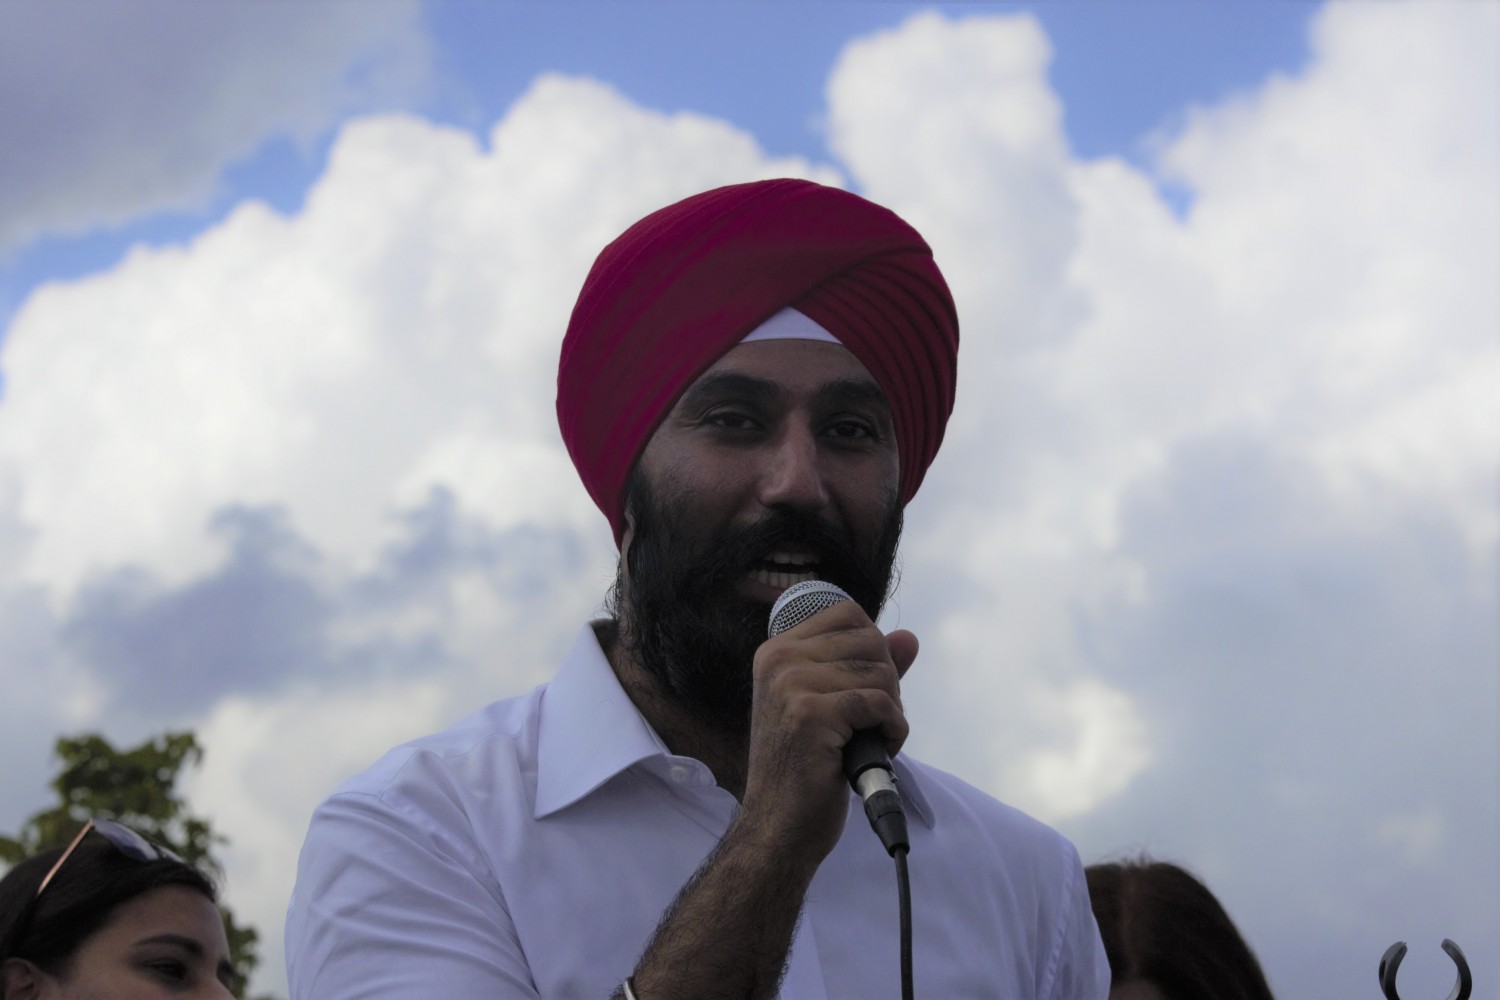 Raj Grewal returns to Parliament, not resigning after receiving “appropriate treatment”